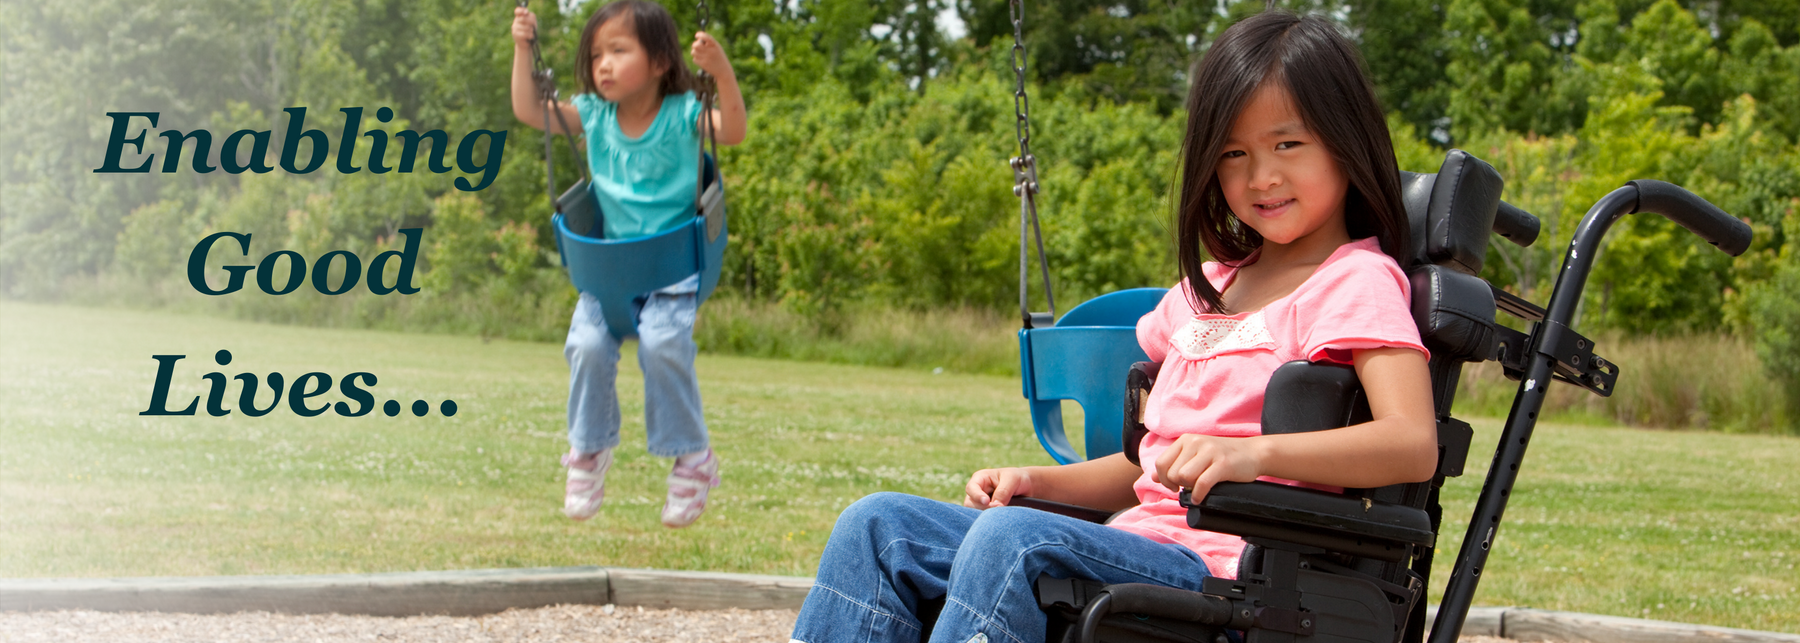 Two children at a playground, one in a wheelchair and one on a swing